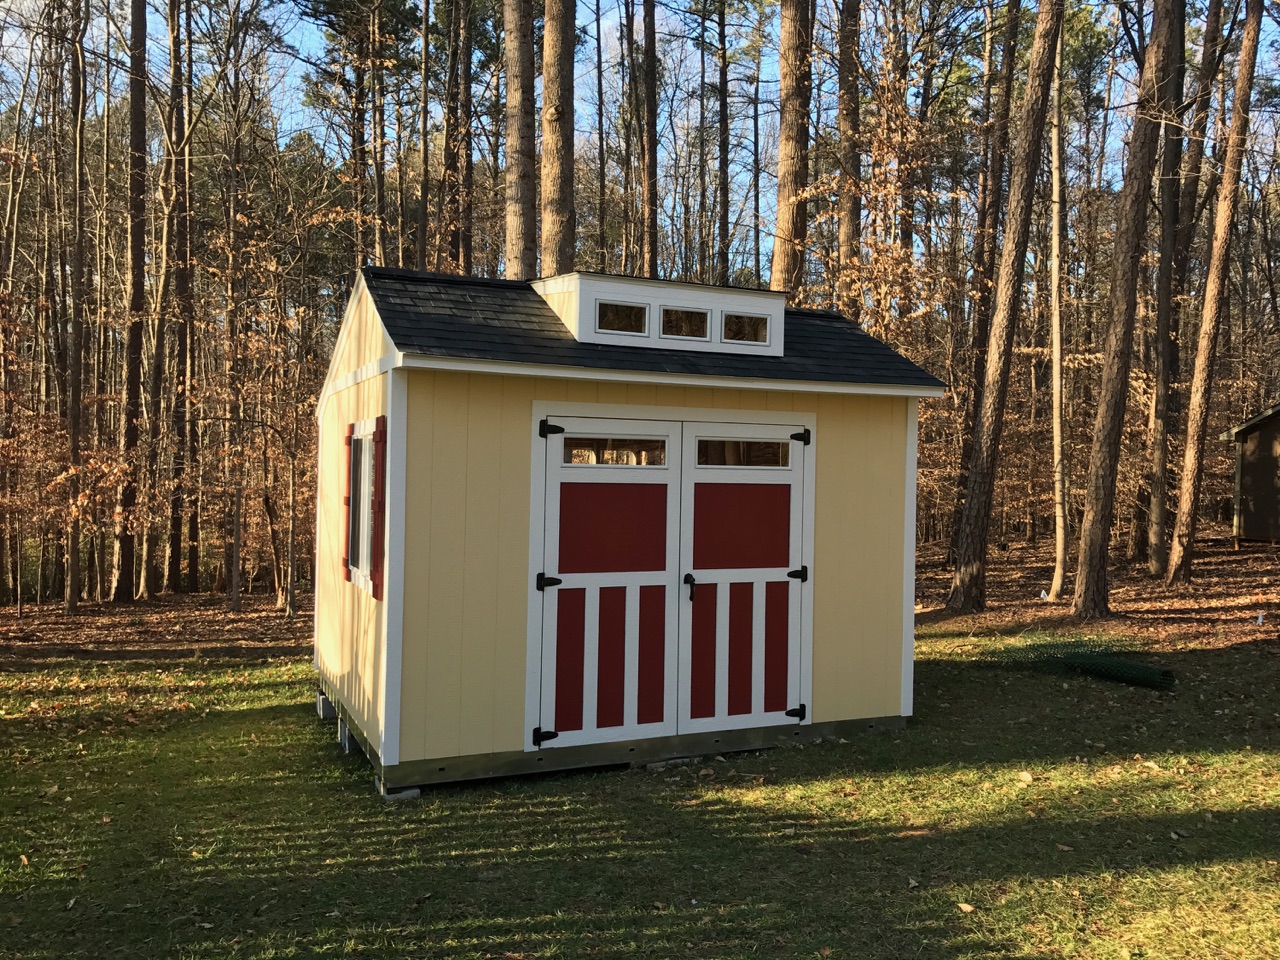 Storage in a Saltbox – Tuff Shed